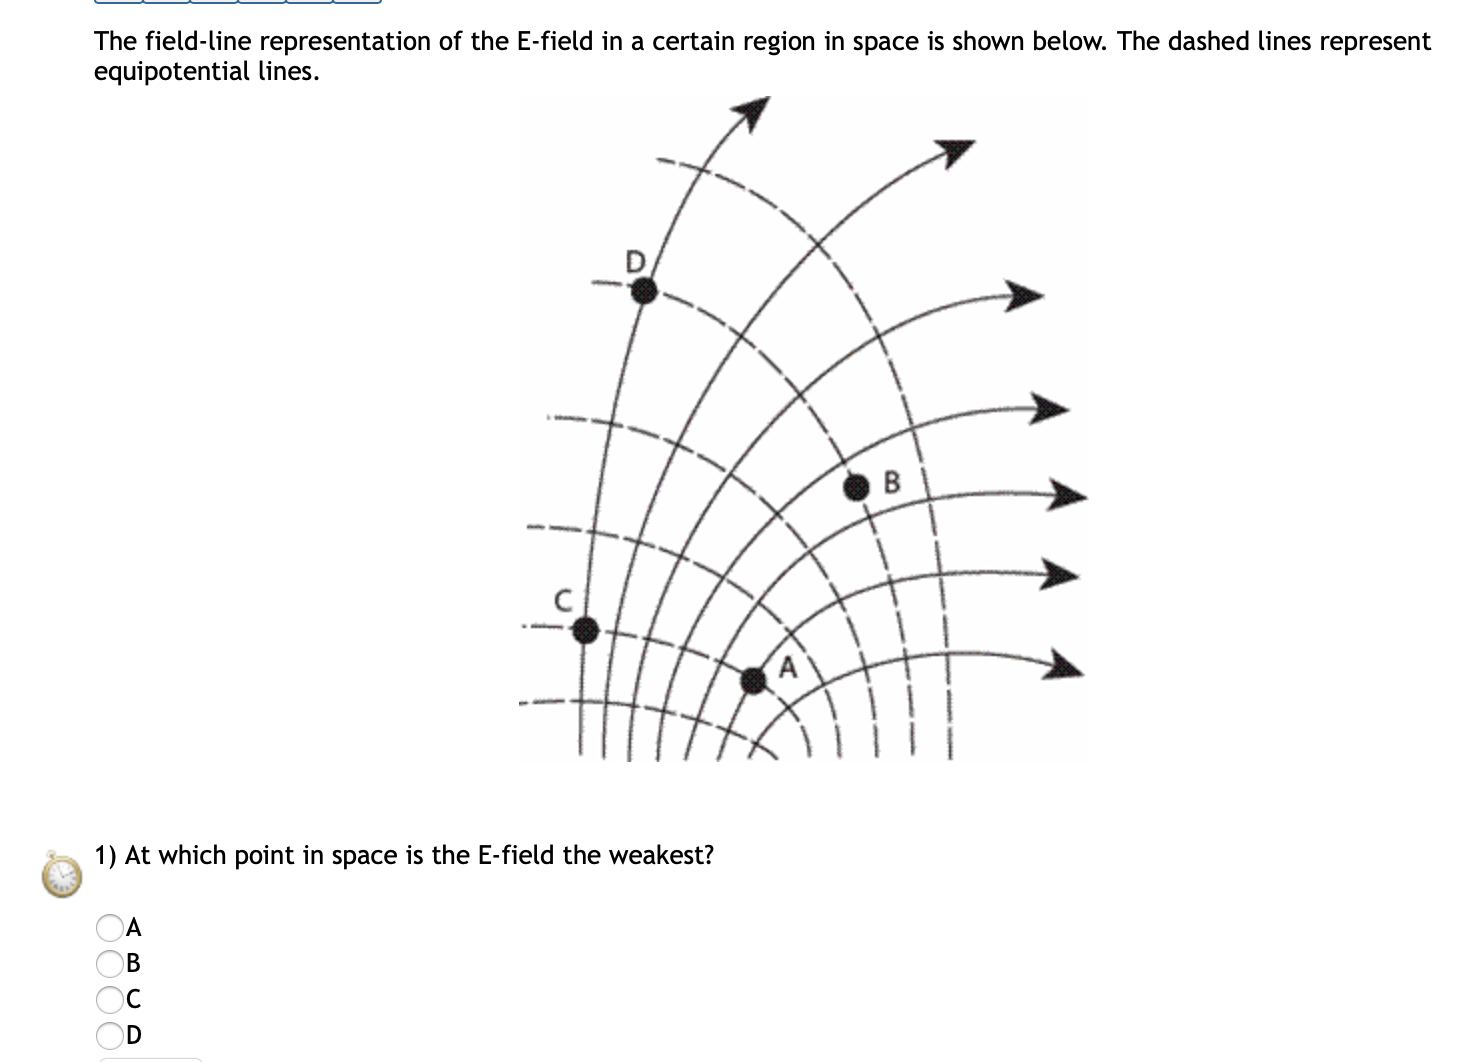 The field-line representation of the E-field in a certain region in space is shown below. The dashed lines represent
equipotential lines.
1) At which point in space is the E-field the weakest?
OC
